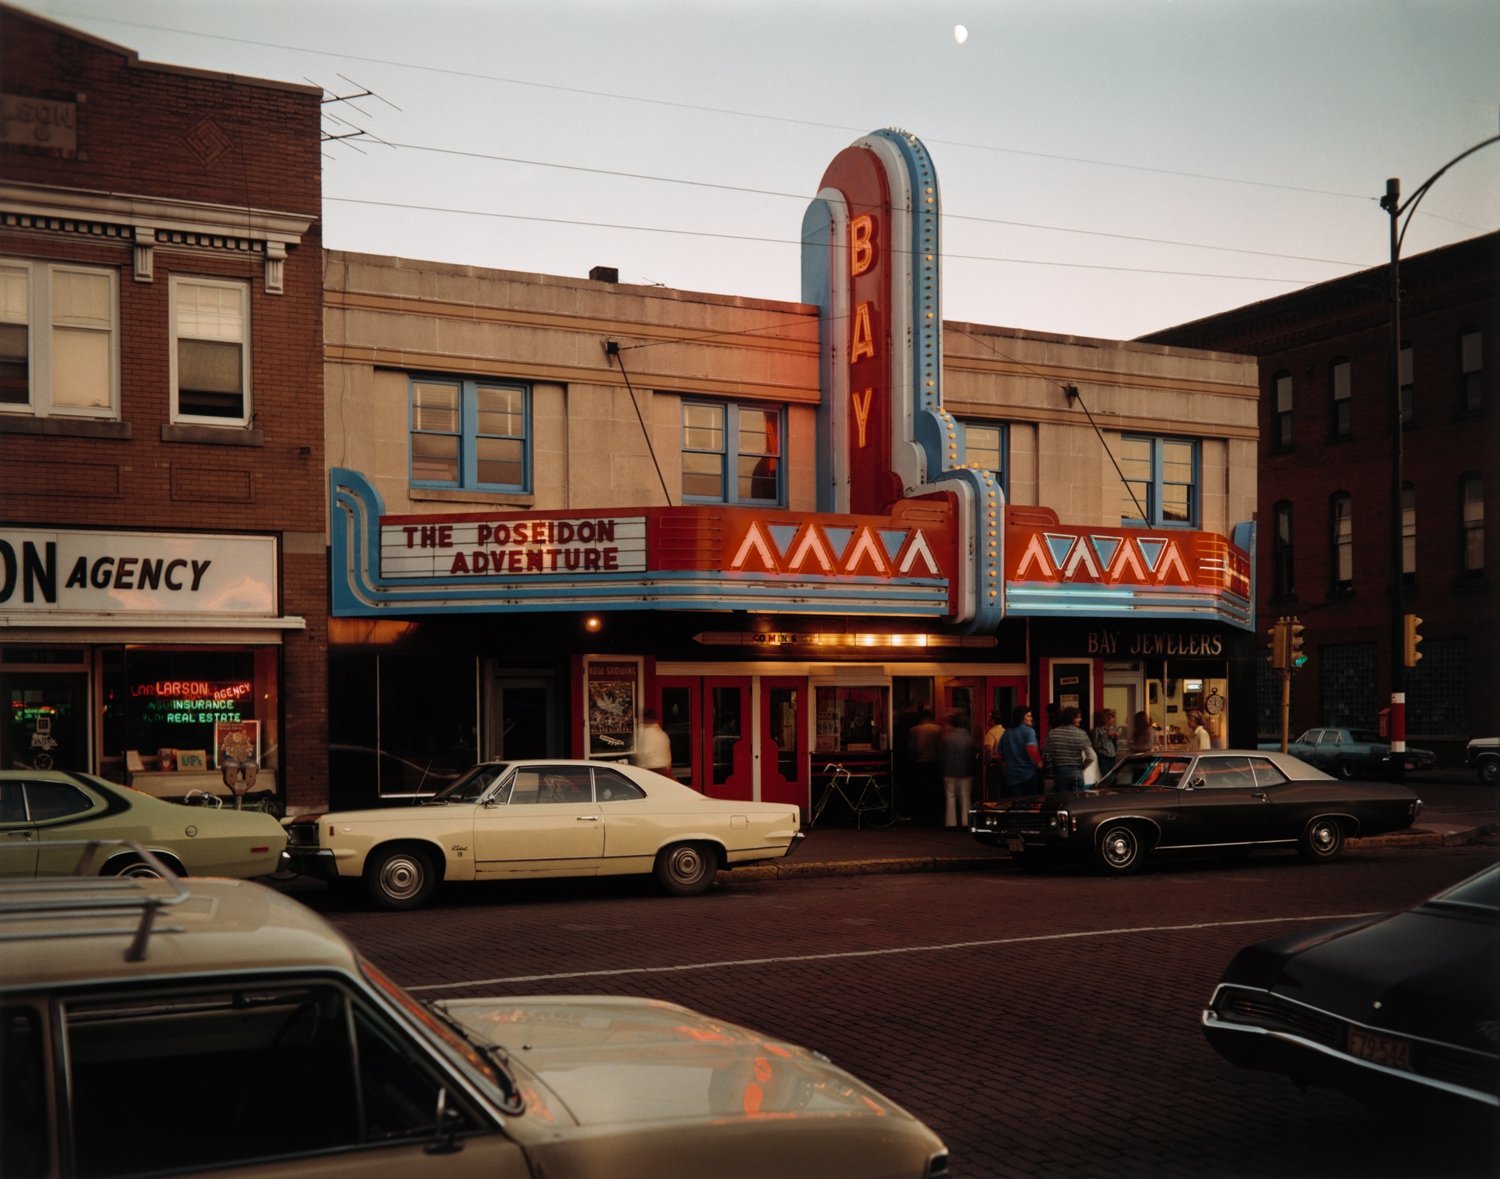  Stephen Shore,  2nd Street, Ashland, Wisconsin,  July 9, 1973, 1973. Courtesy of the Pilara Family Foundation Collection and Sotheby’s.&nbsp; 